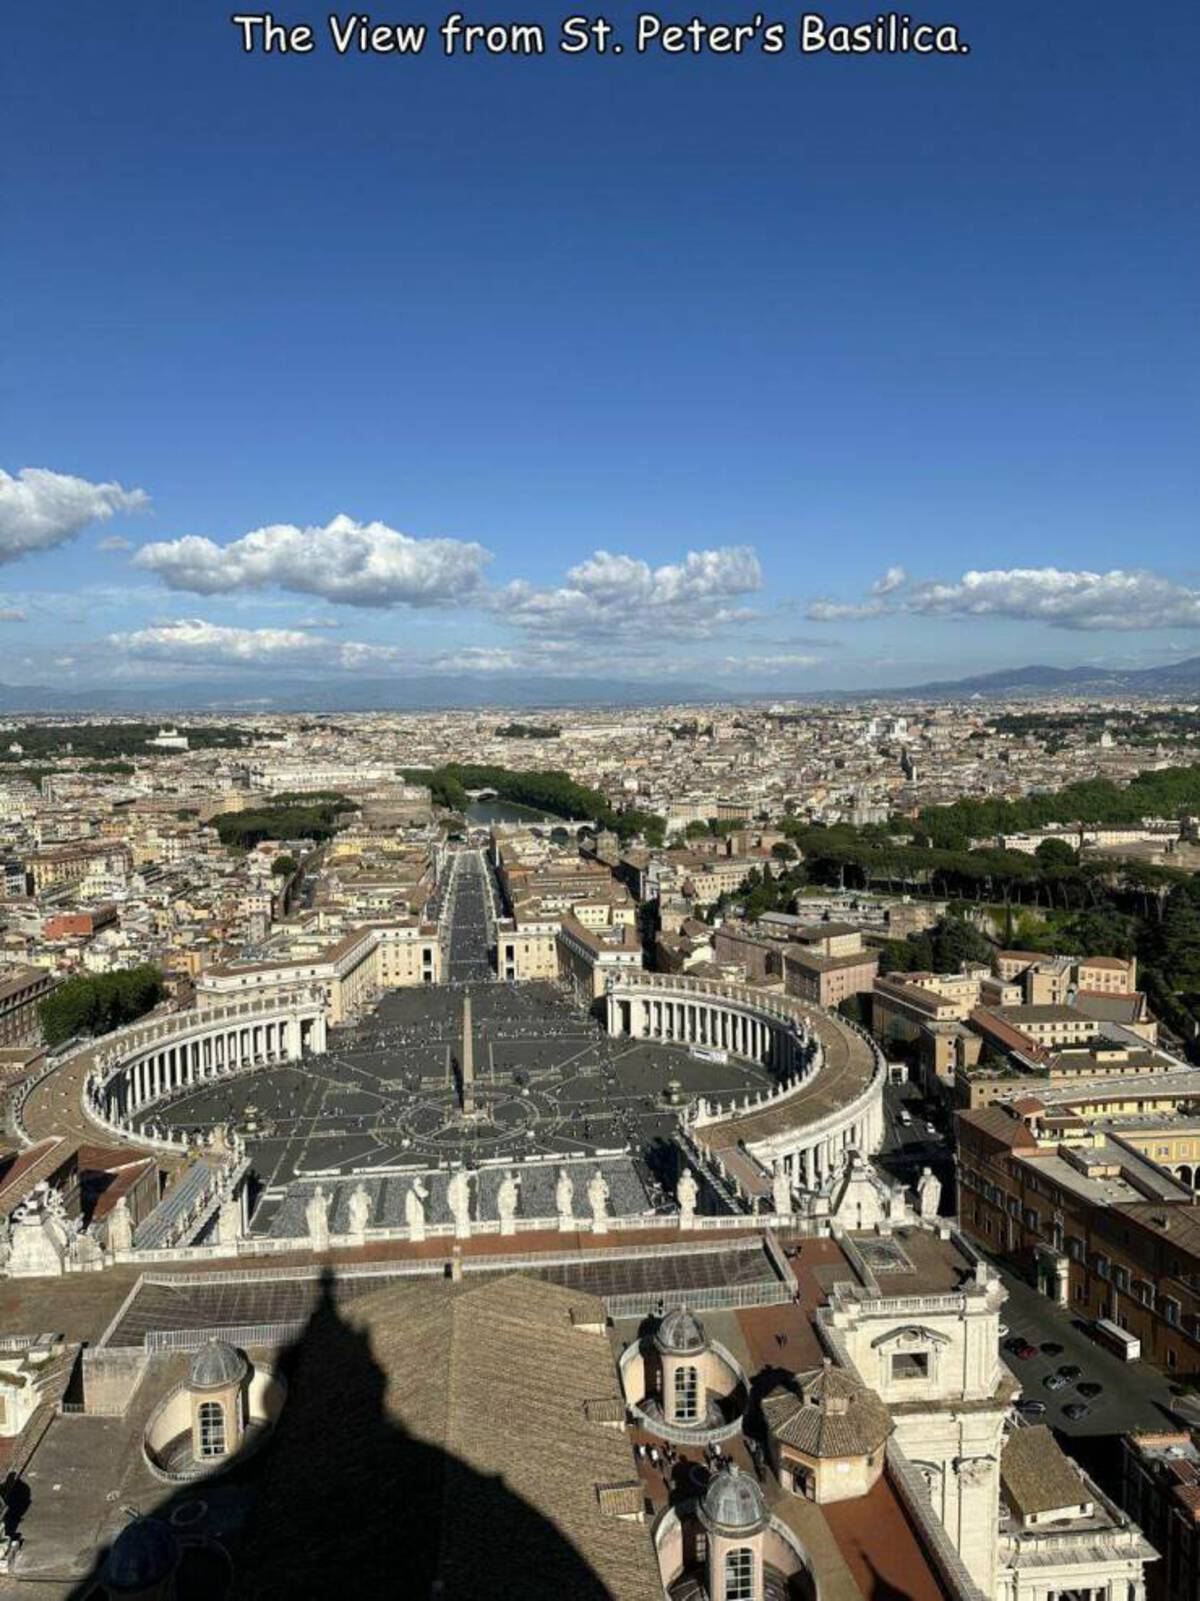 The View from St. Peter's Basilica.